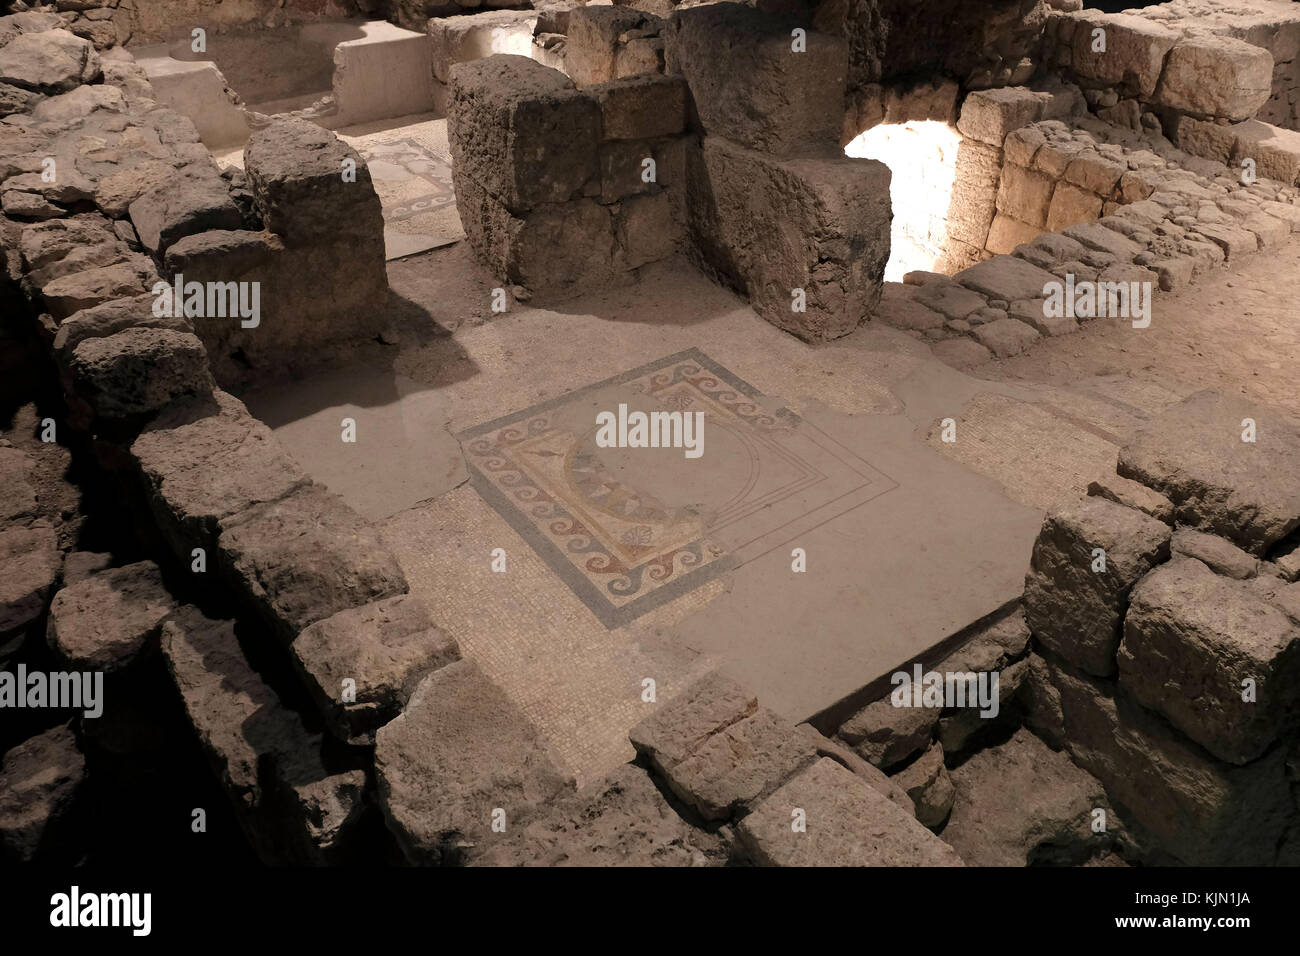 Remains of a house and a floor mosaic uncovered at the site, which was  part of a residential quarter in the time of the Herodian Dynasty (37 BCE 70 CE) located in The Wohl Museum of Archeology also called The Herodian Quarter below the level of the present Jewish Quarter in the Old City East Jerusalem Israel. Stock Photo